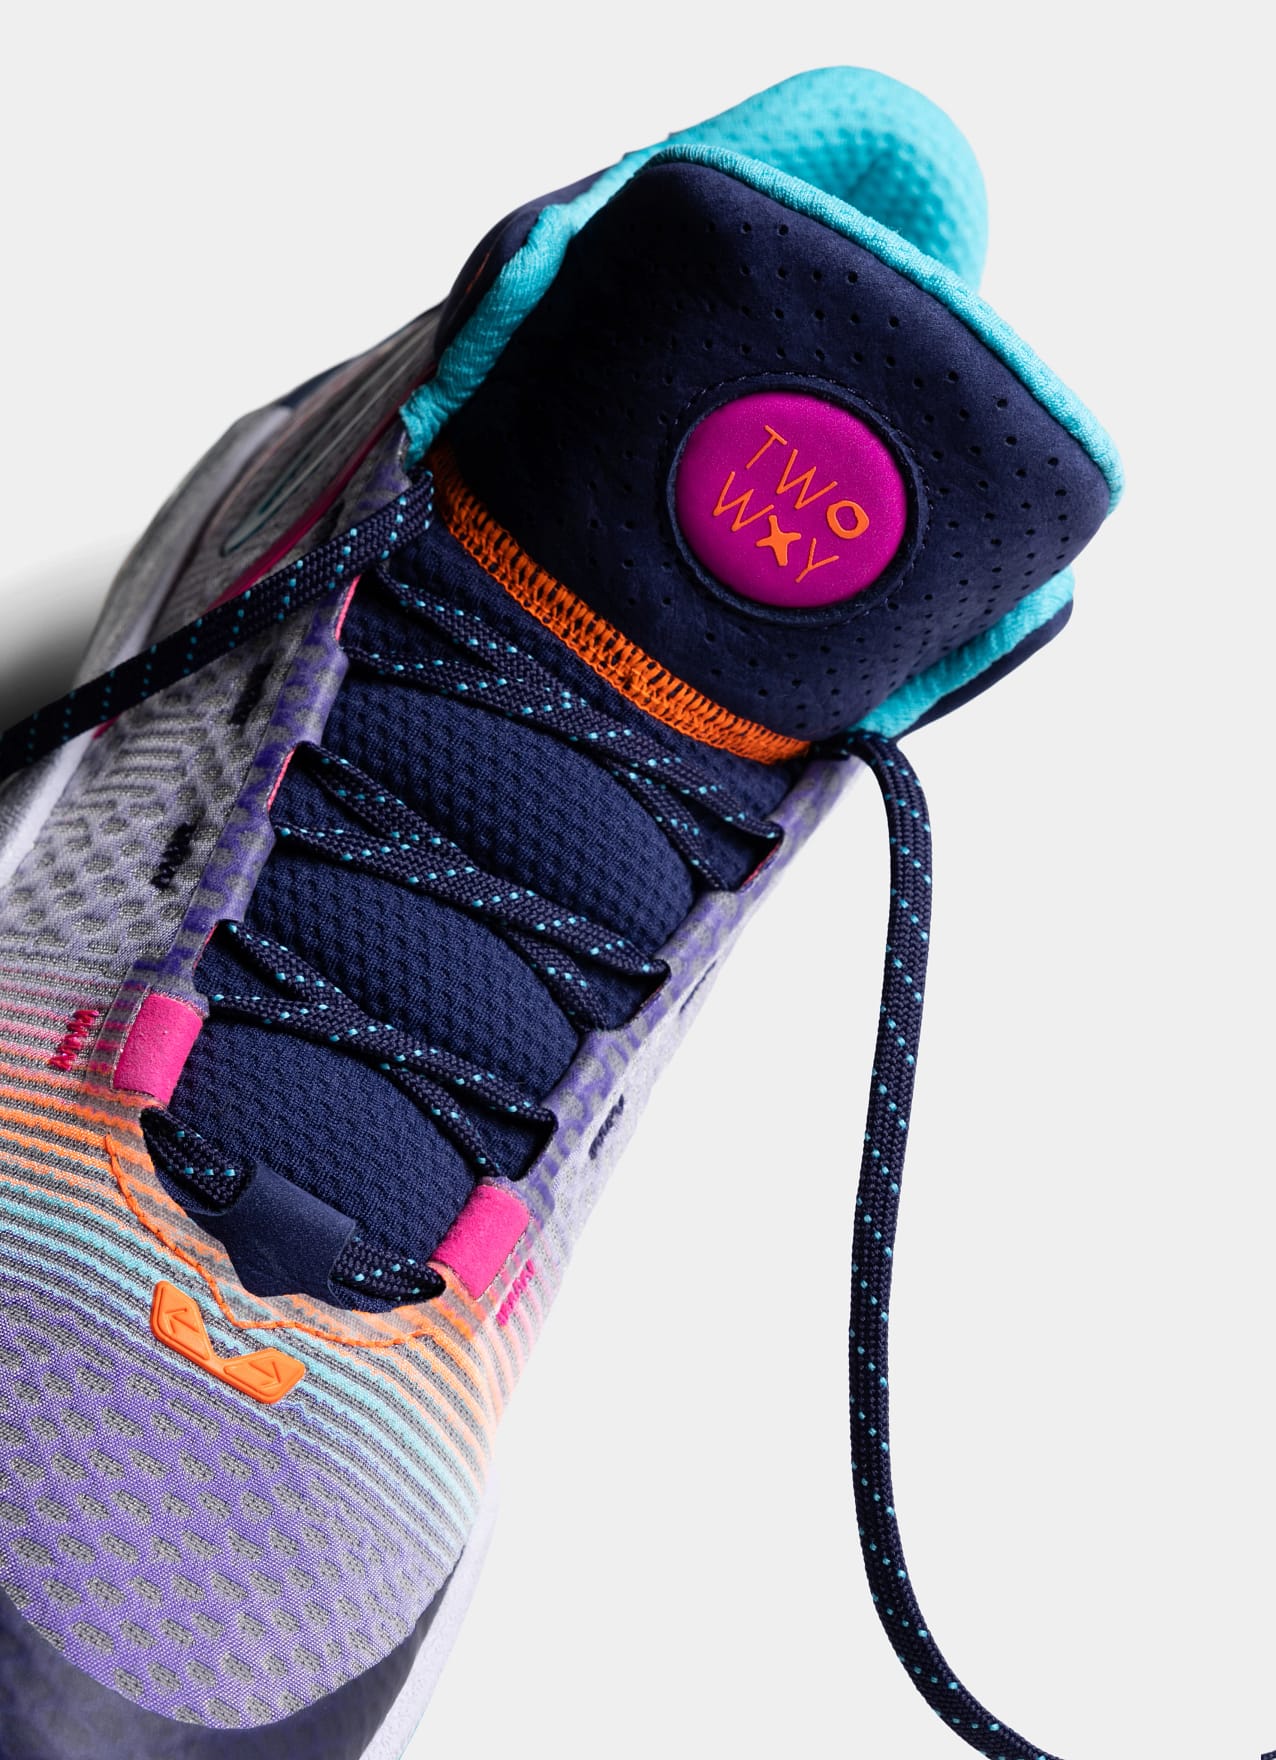 New Balance Two Wxy V2 Basketball Shoe Release Date May 2022 